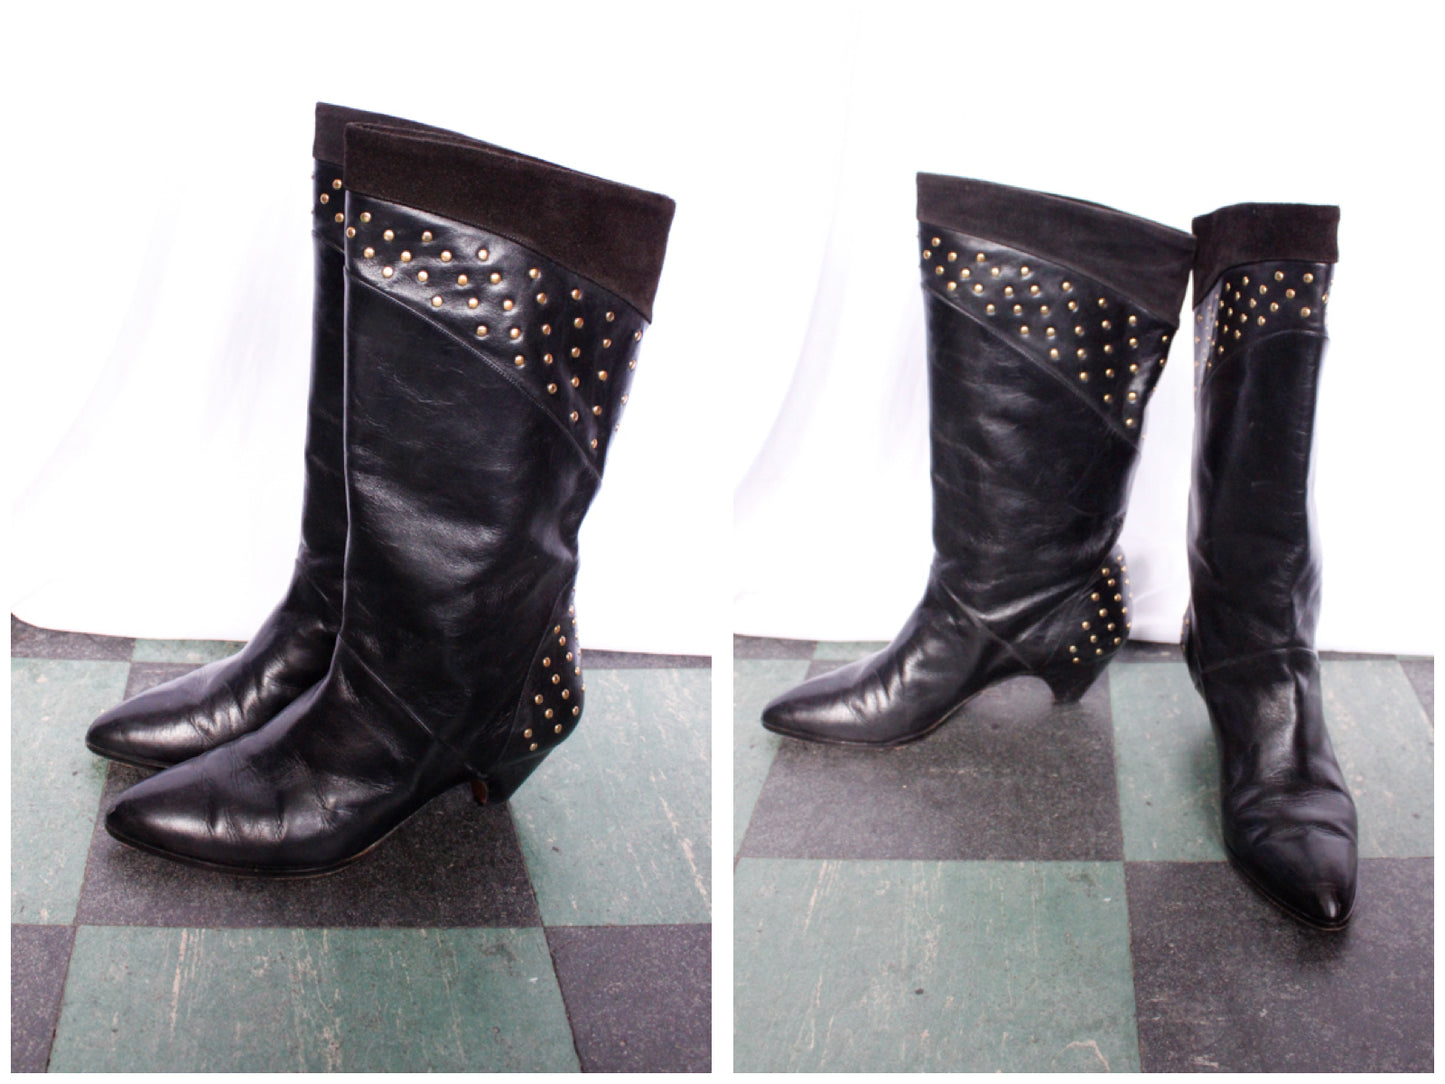 1990s Studded Black Leather Boots - 8.5B